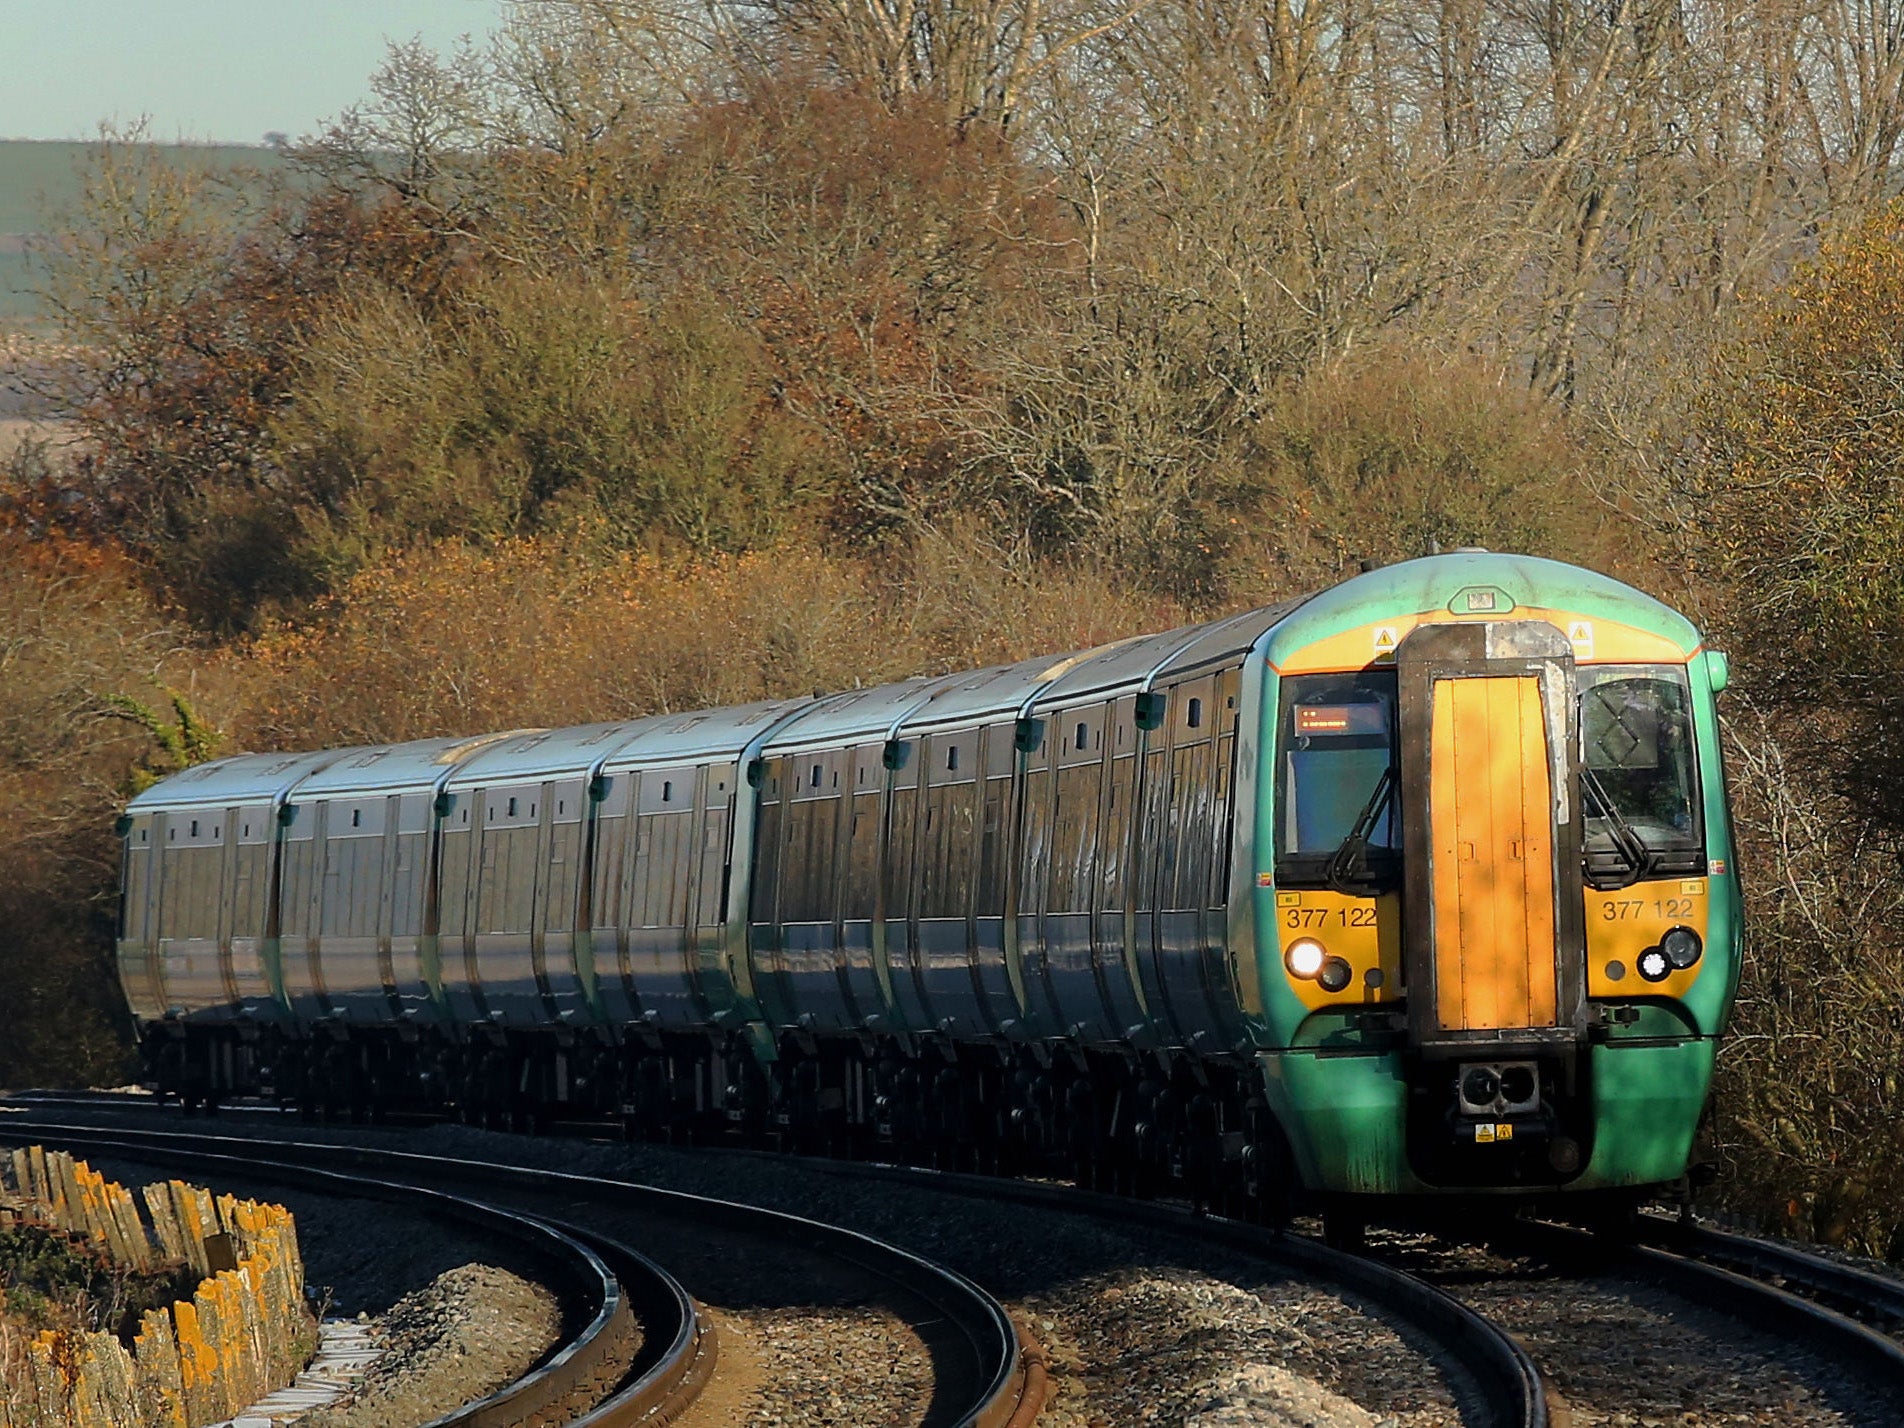 The Rail Delivery Group said the fare hike would help improve services